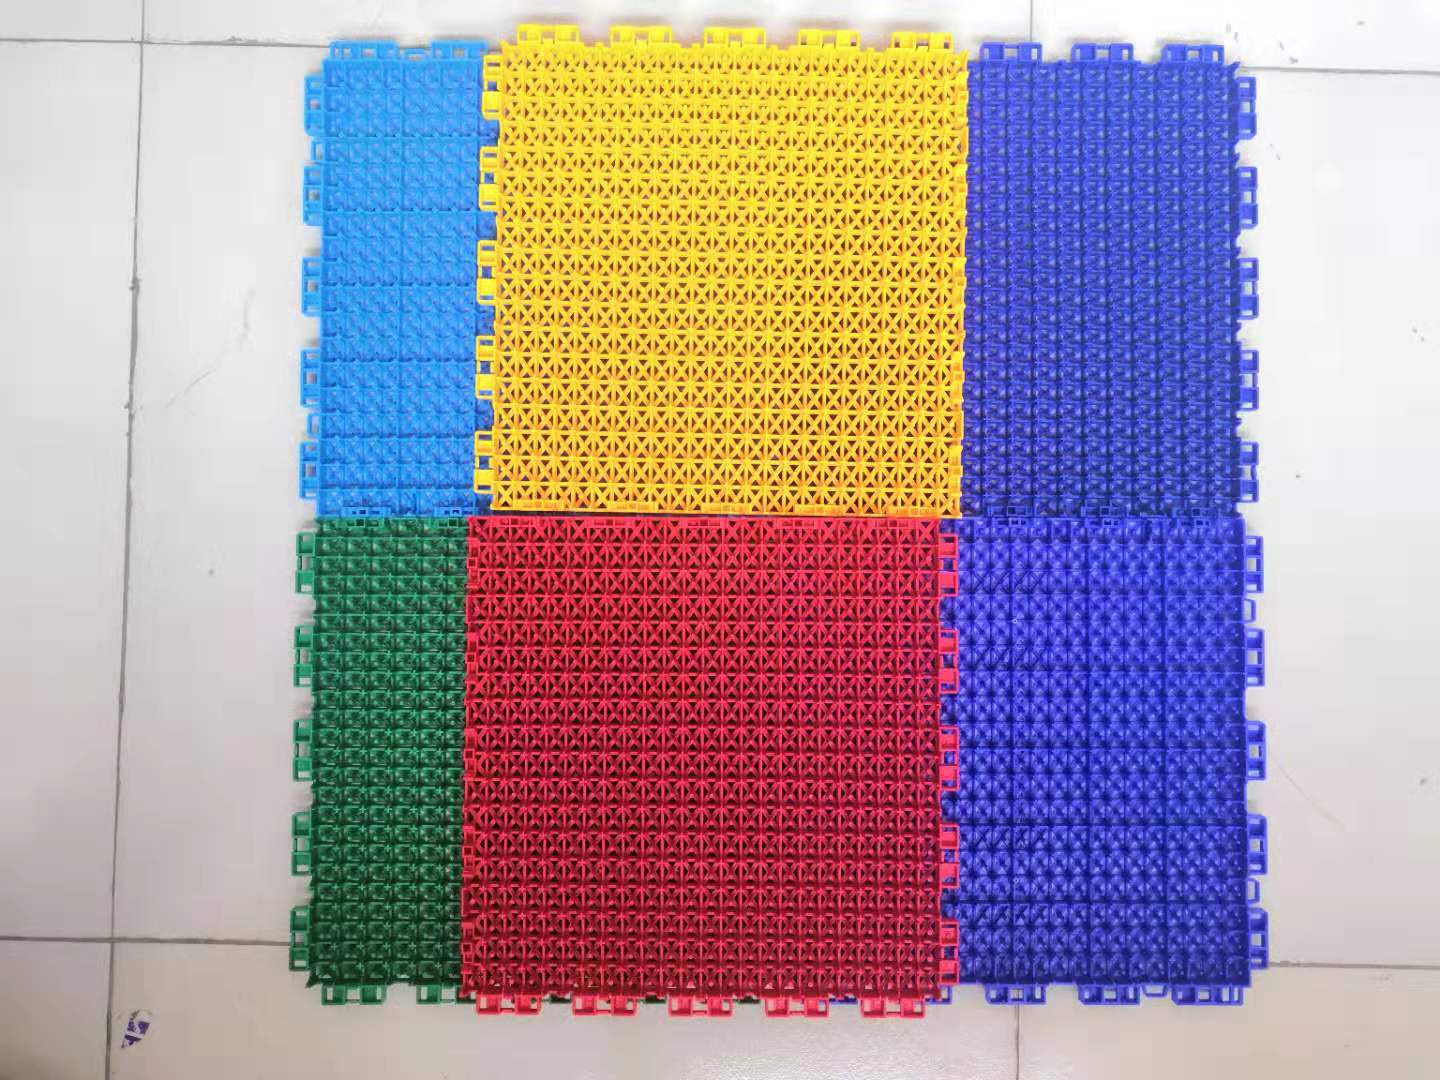 Best selling New Outdoor PP floor for tennis volleyball Basketball Court  good quality wholesale